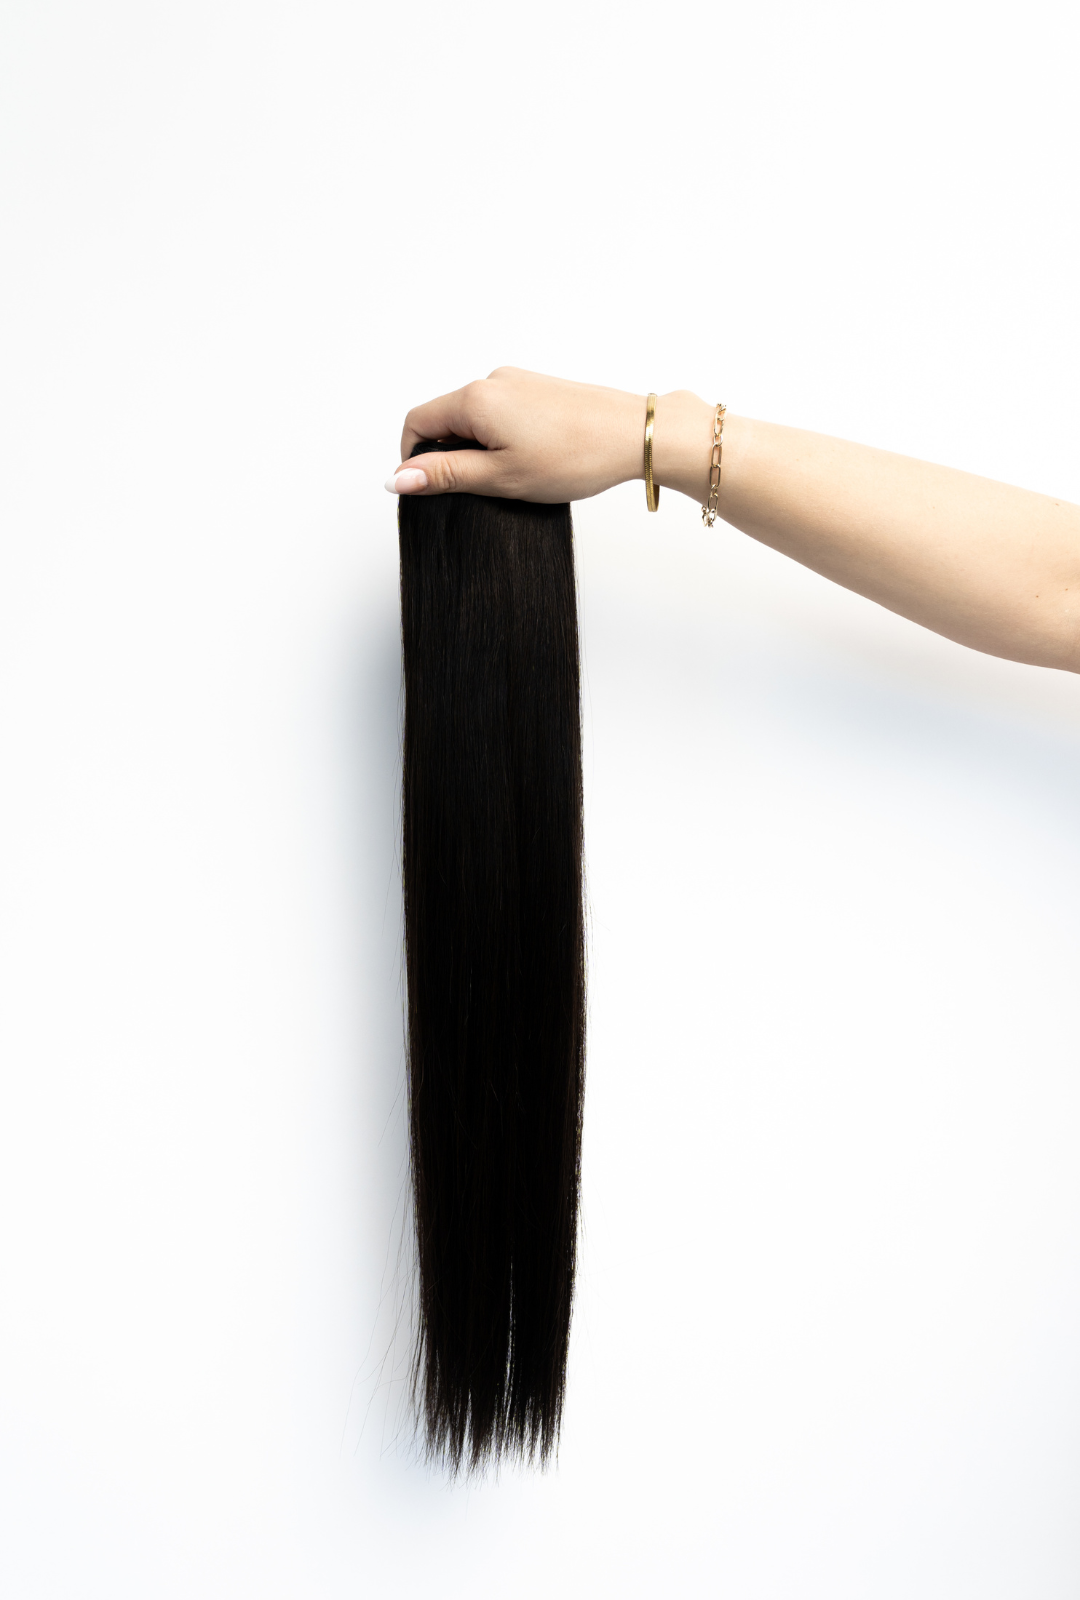 Laced Hair Hand Tied Weft Extensions #1B (Dark Roast)